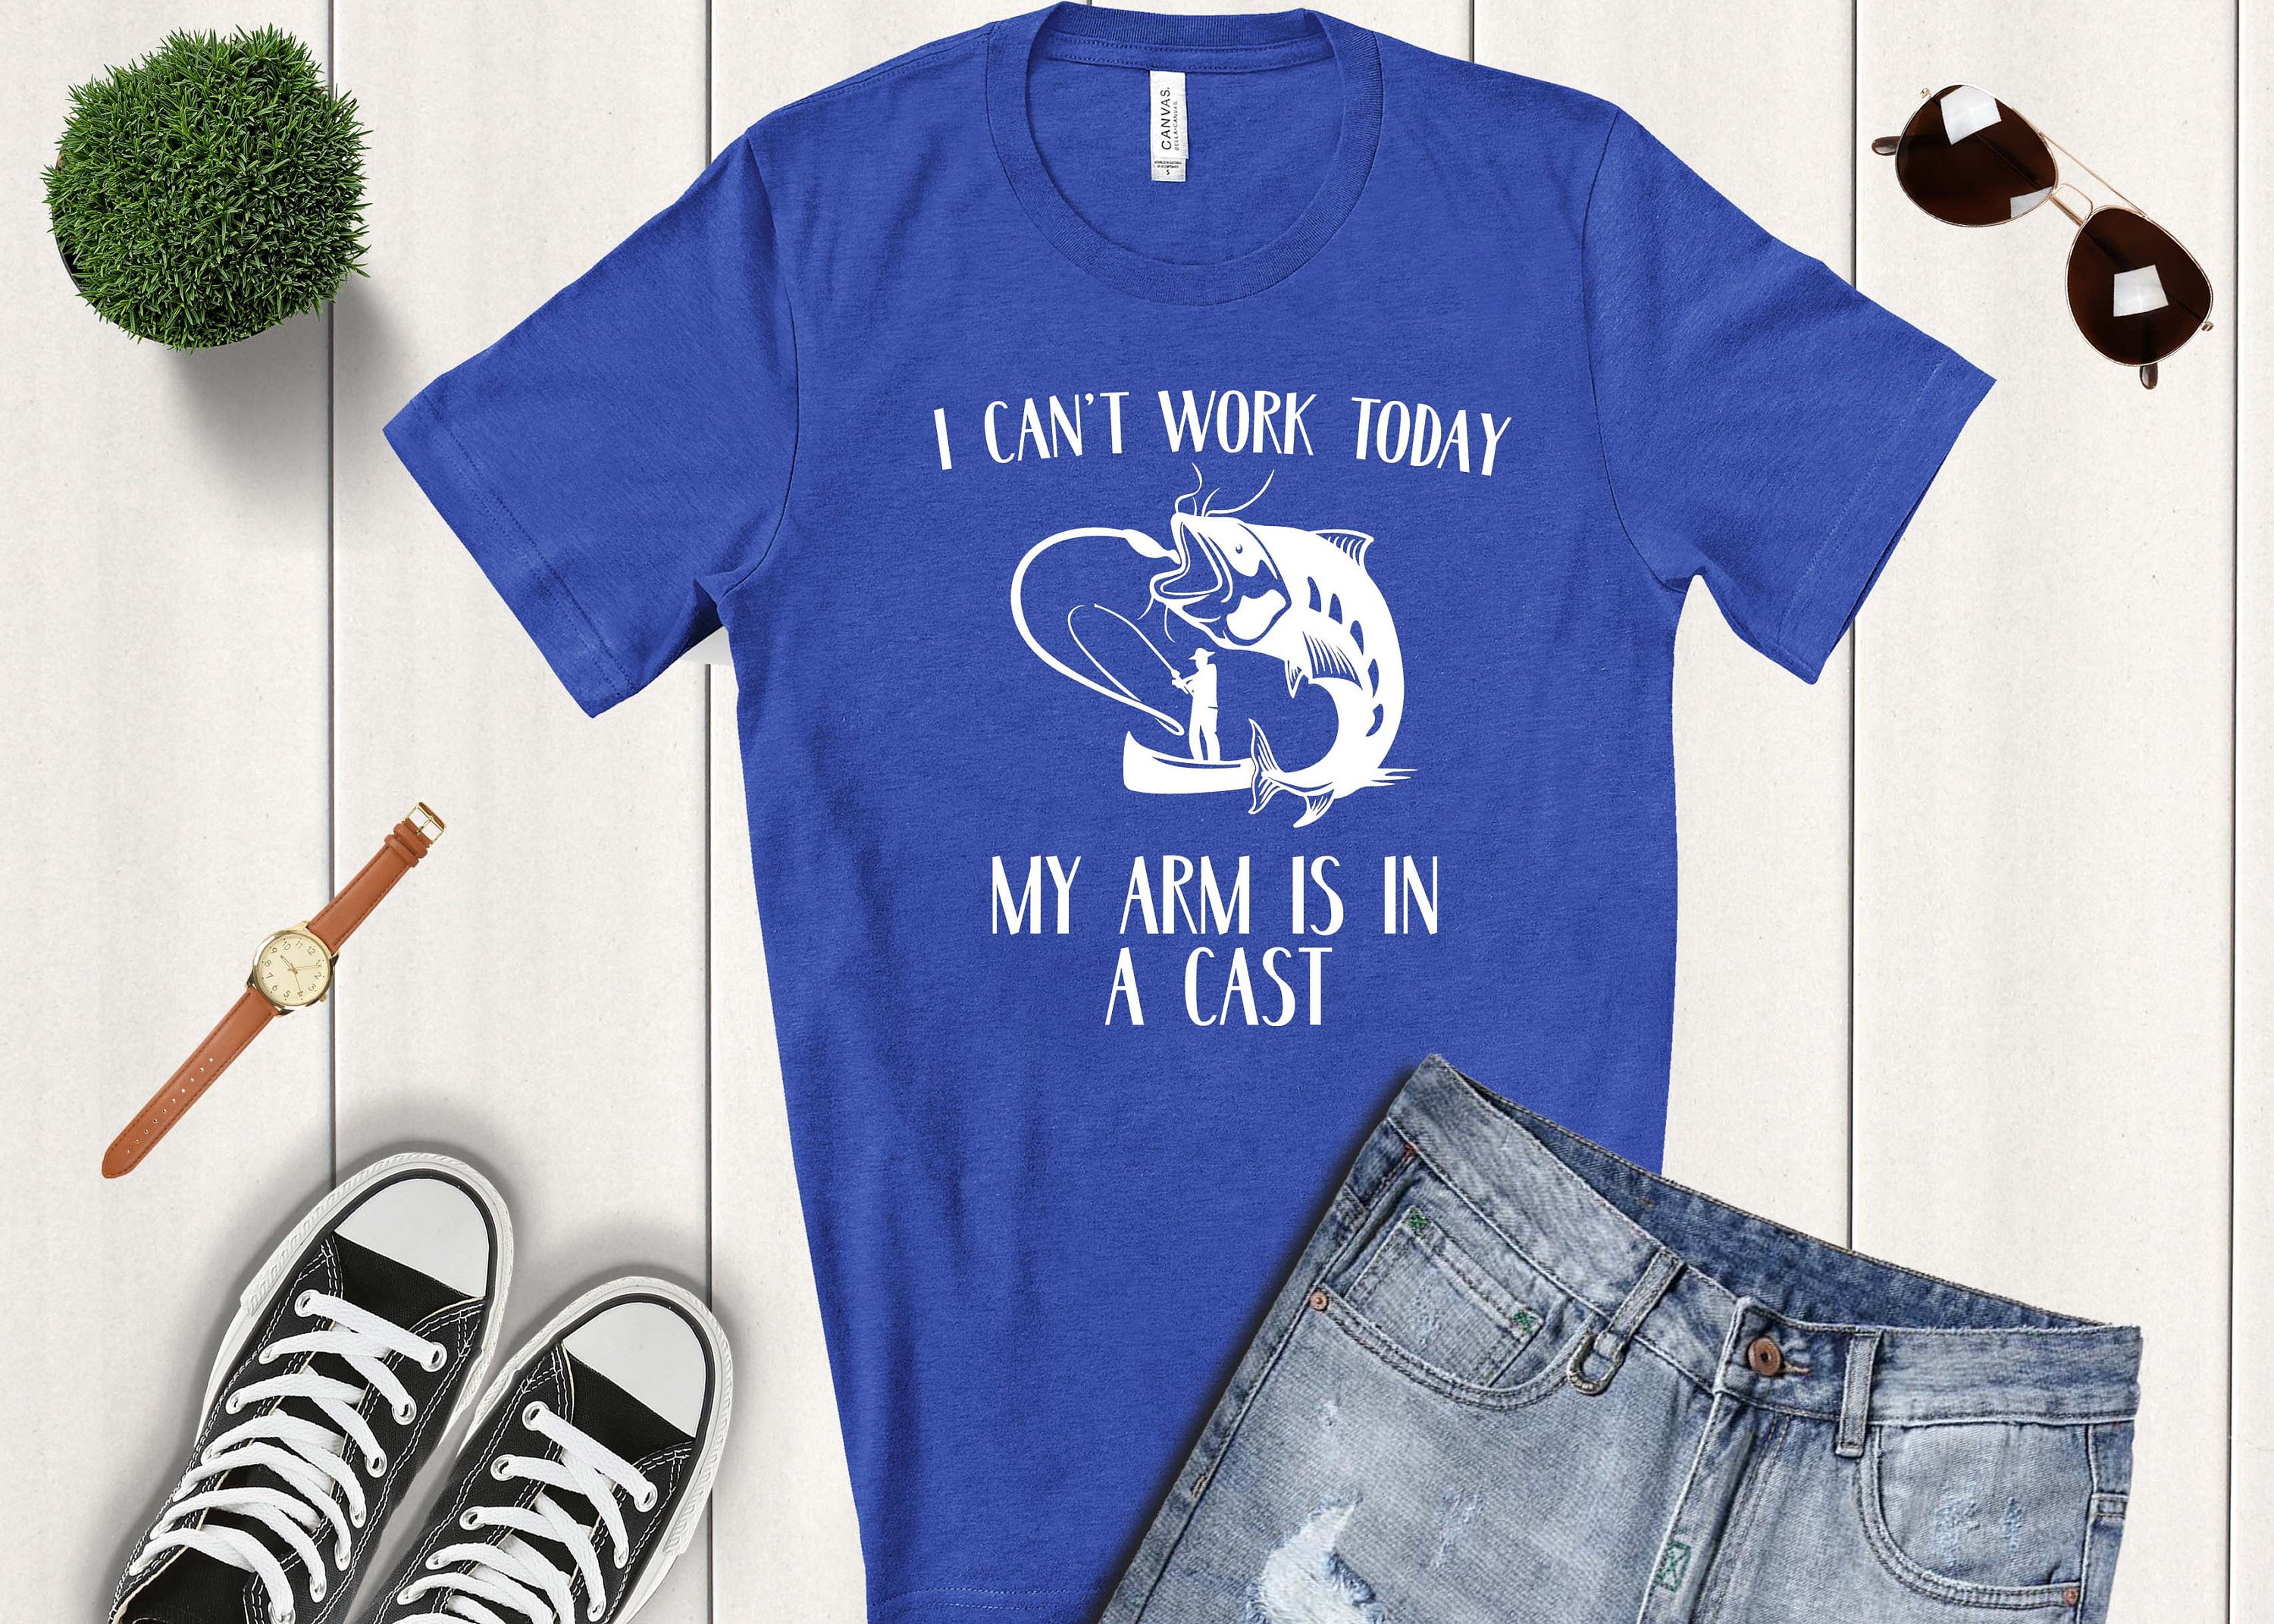 WTF Where's The Fish Men's Funny Fishing T-Shirt : : Clothing,  Shoes & Accessories